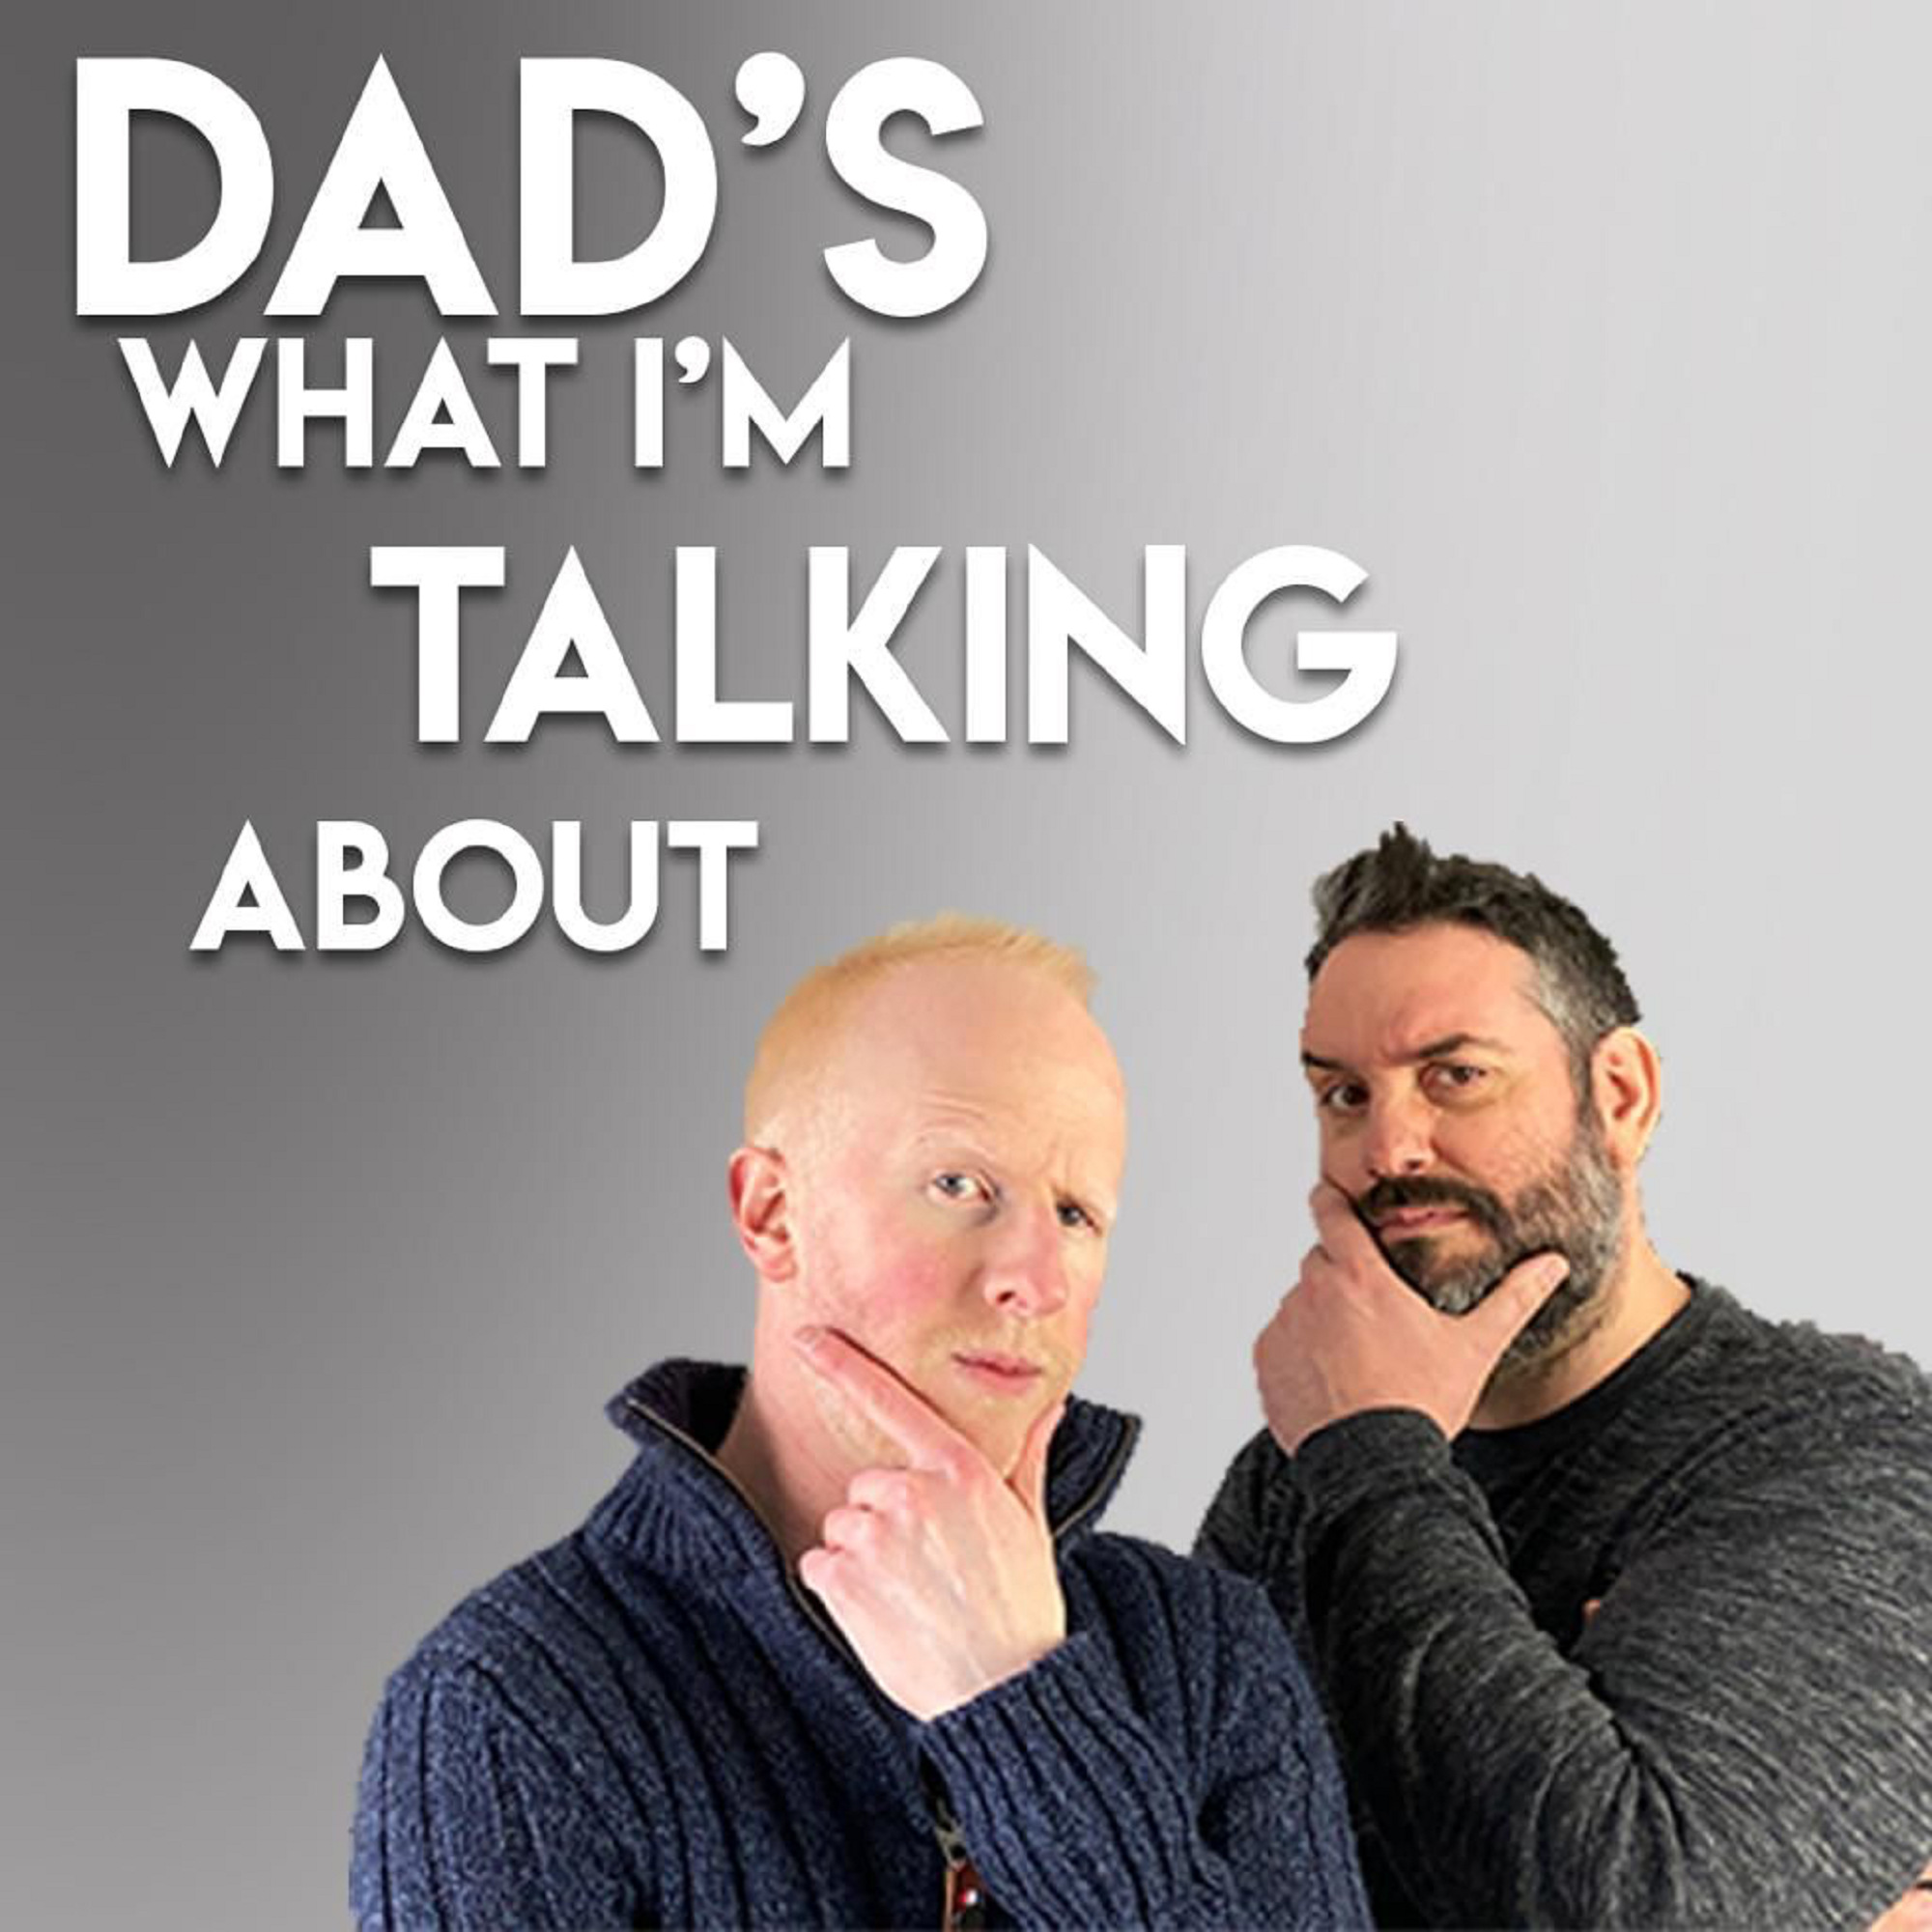 Artwork for podcast Guild of Dads: The Home of Dadprovement